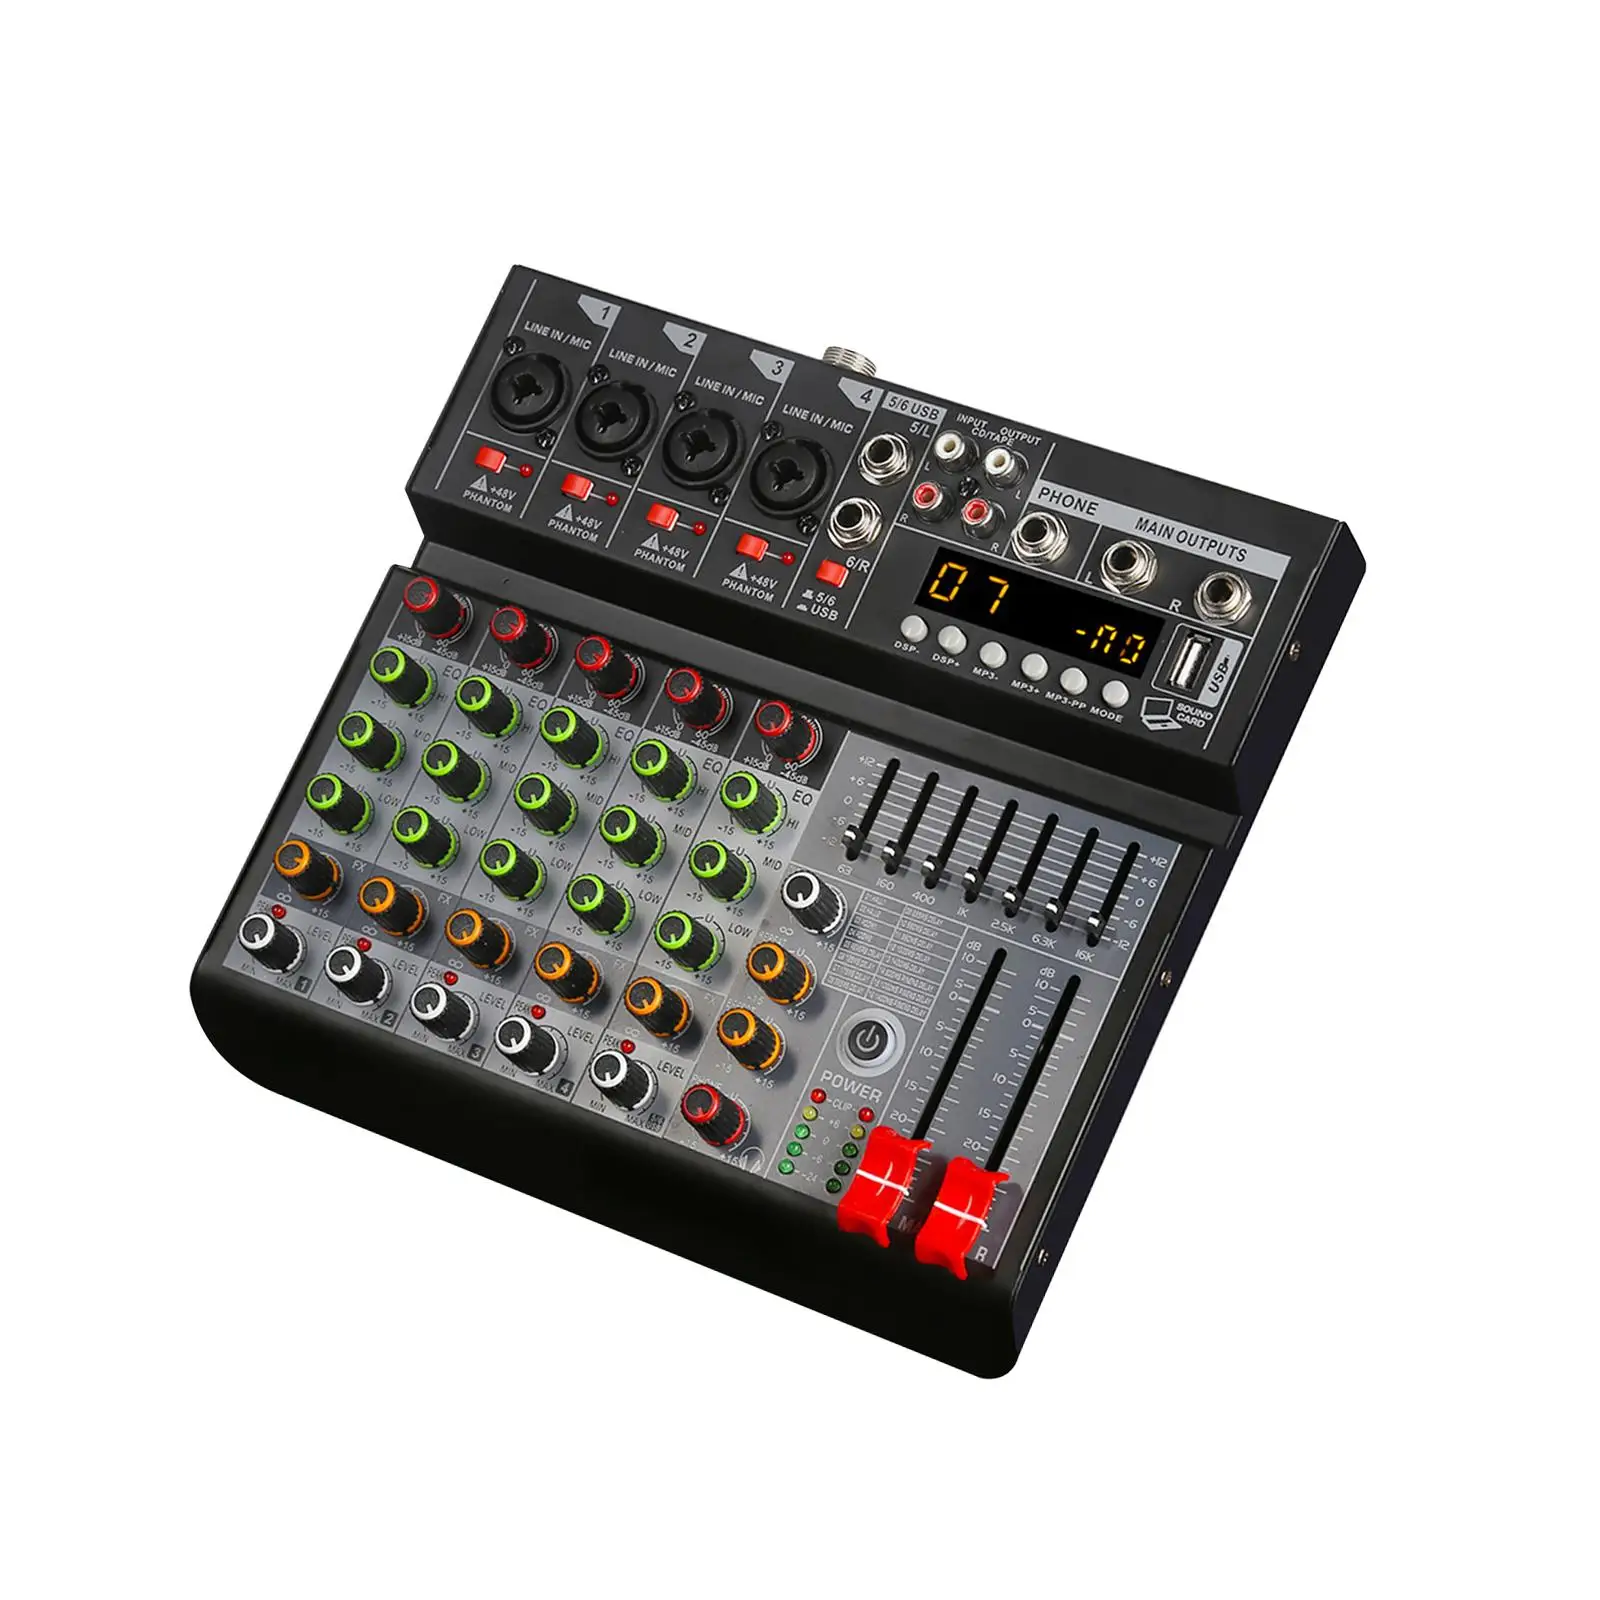 6 Channel Audio Mixer Digital Processor Portable Sound Mixing Console for PC Family KTV Campus Speech Meeting Recording DJ Stage